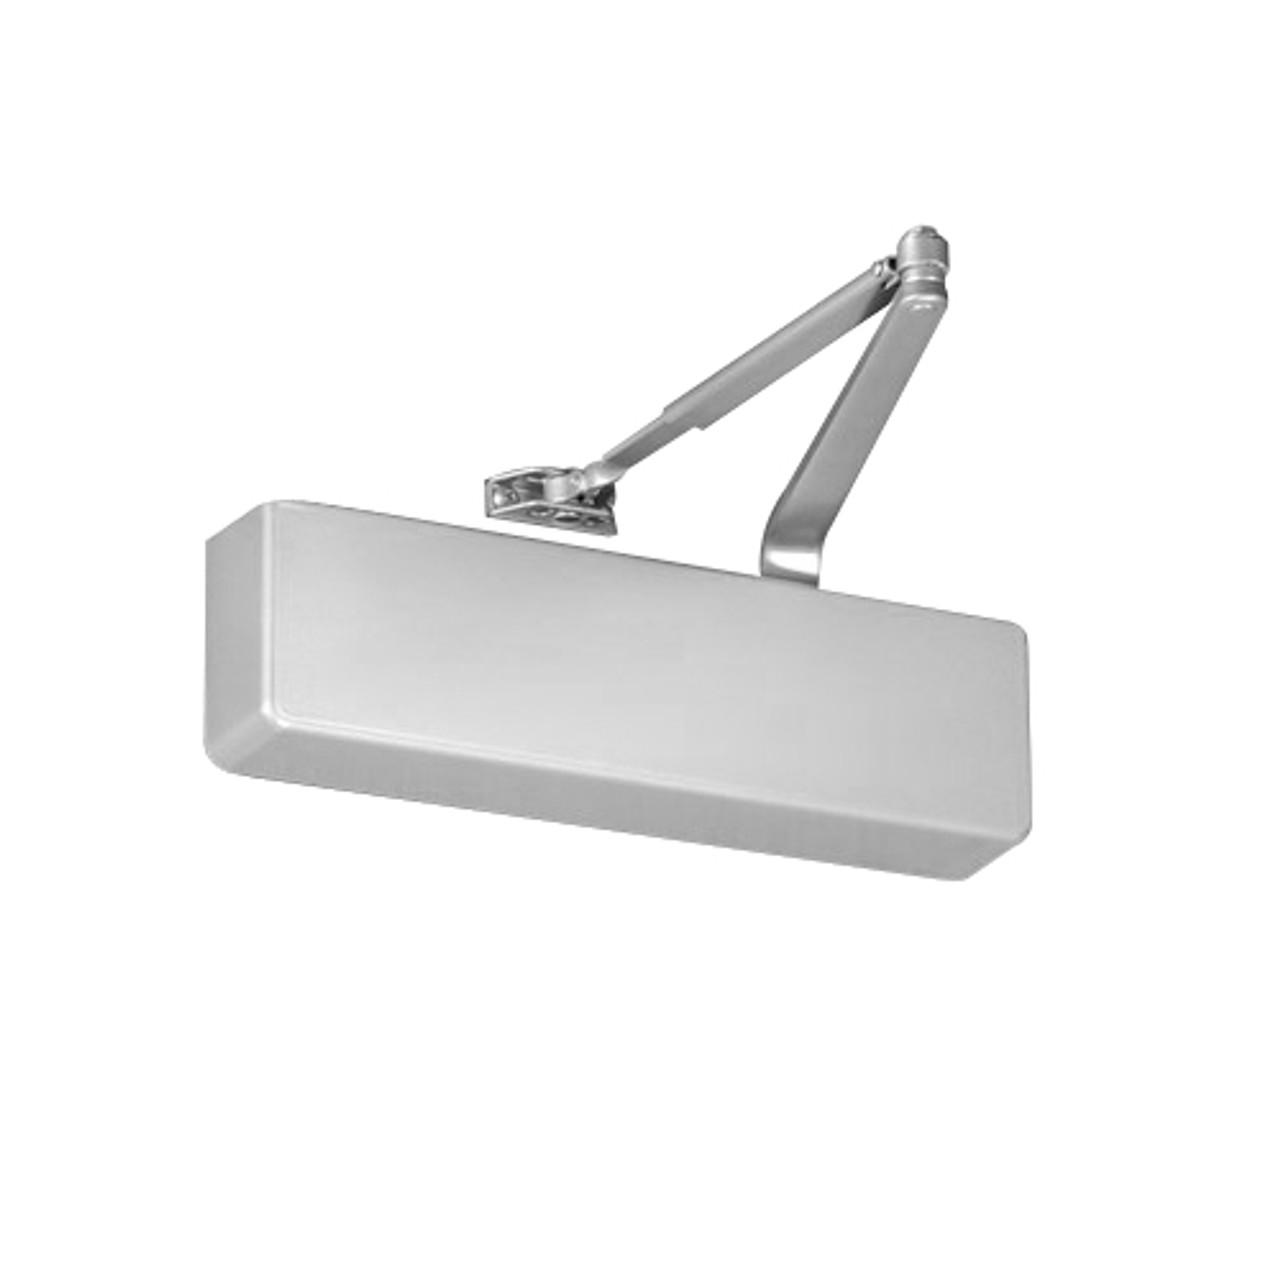 7500H-689 Norton 7500 Series Hold Open Institutional Door Closer with Regular Parallel or Top Jamb to 3 inch Reveal in Aluminum Finish